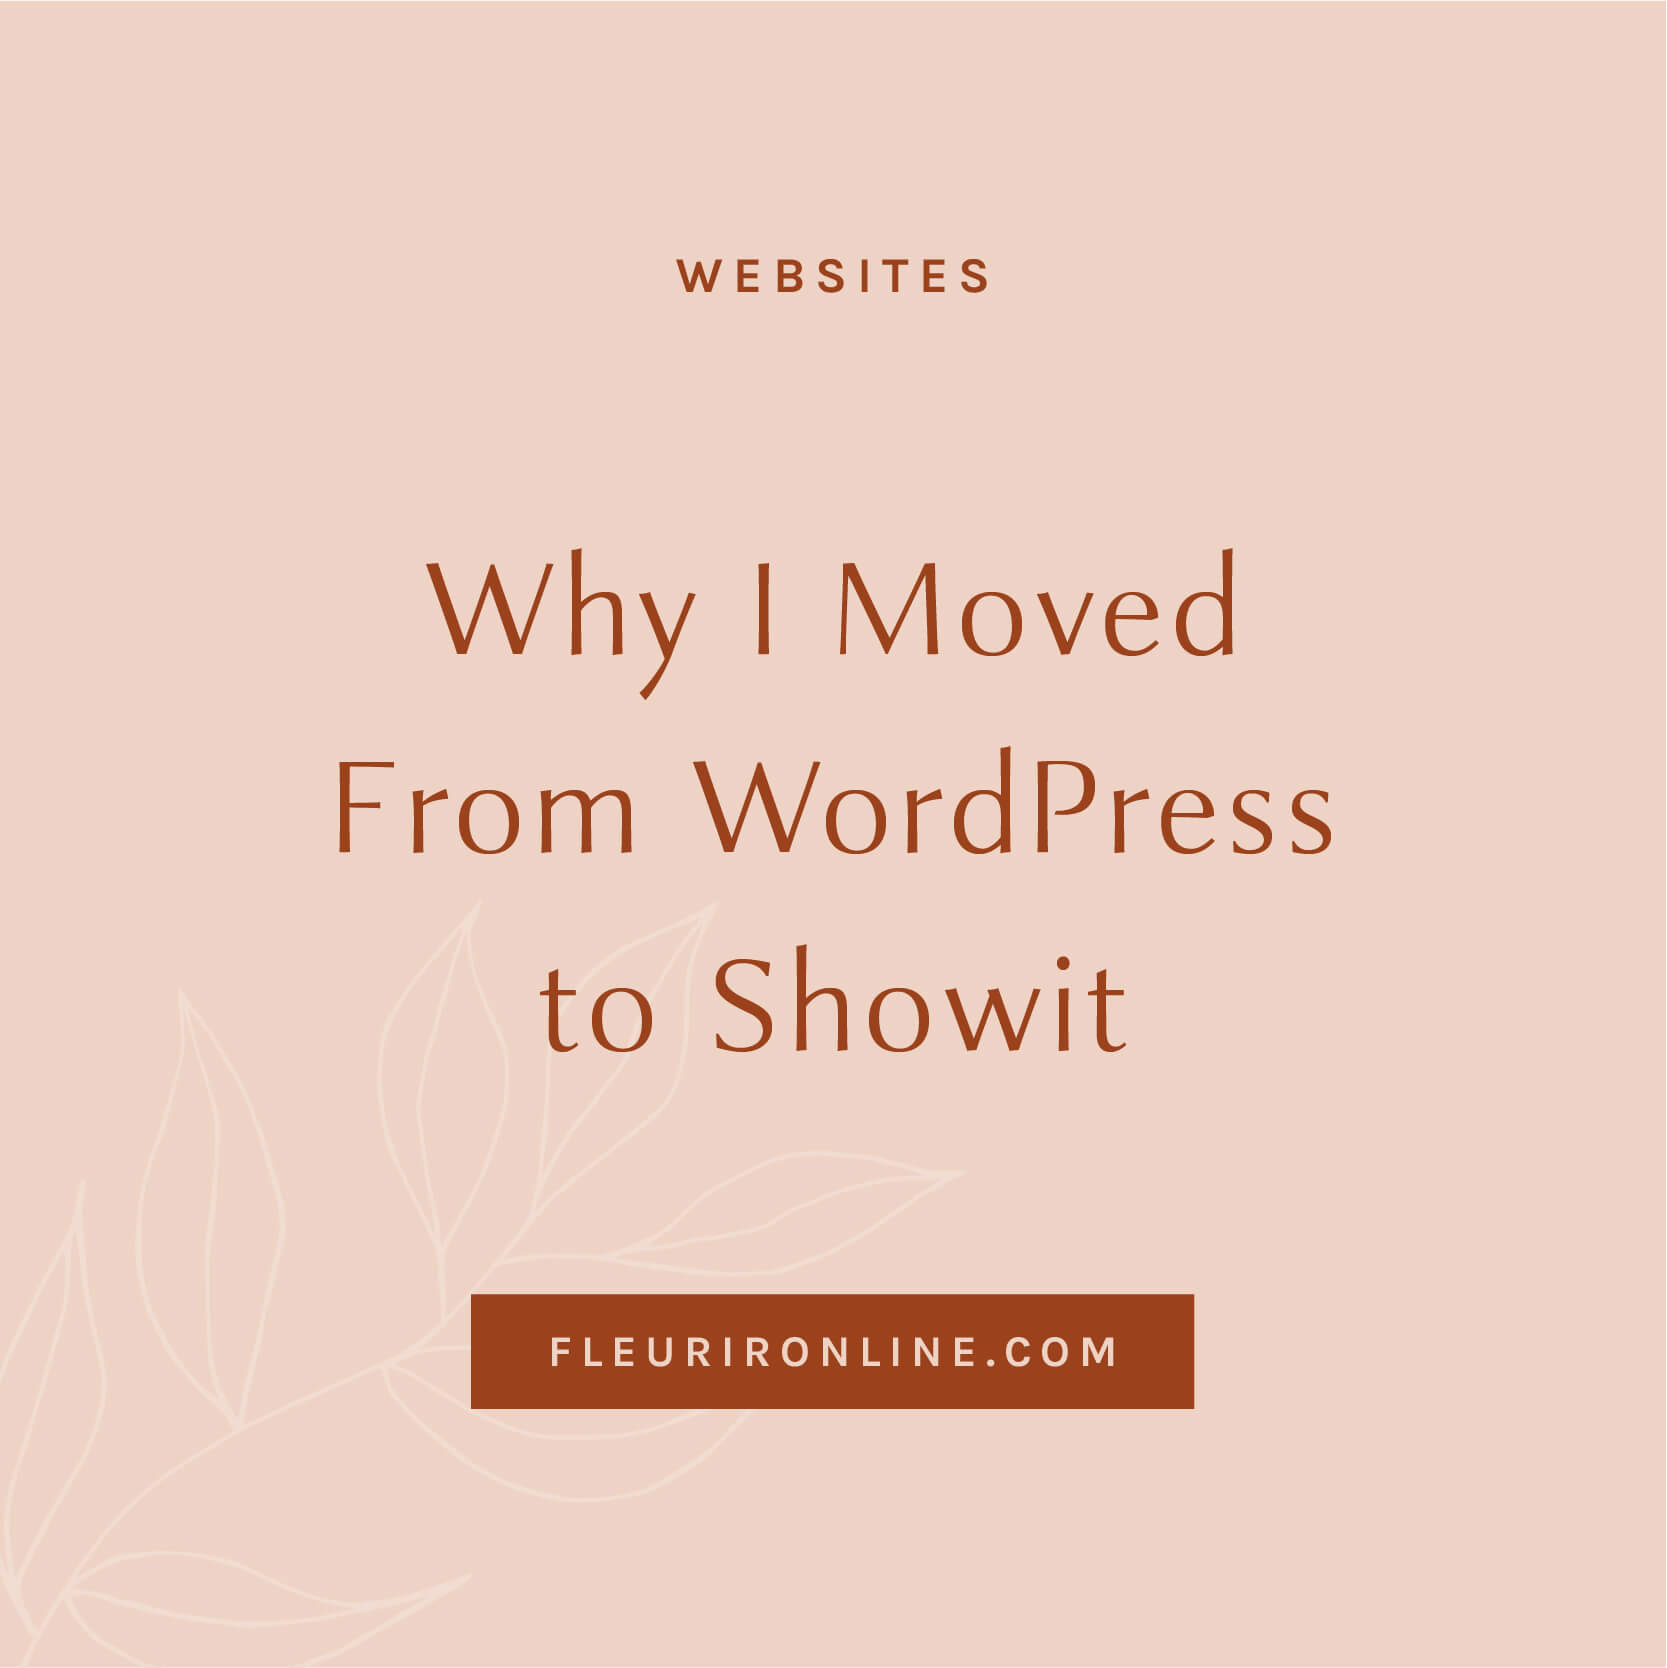 Why I moved from WordPress to Showit